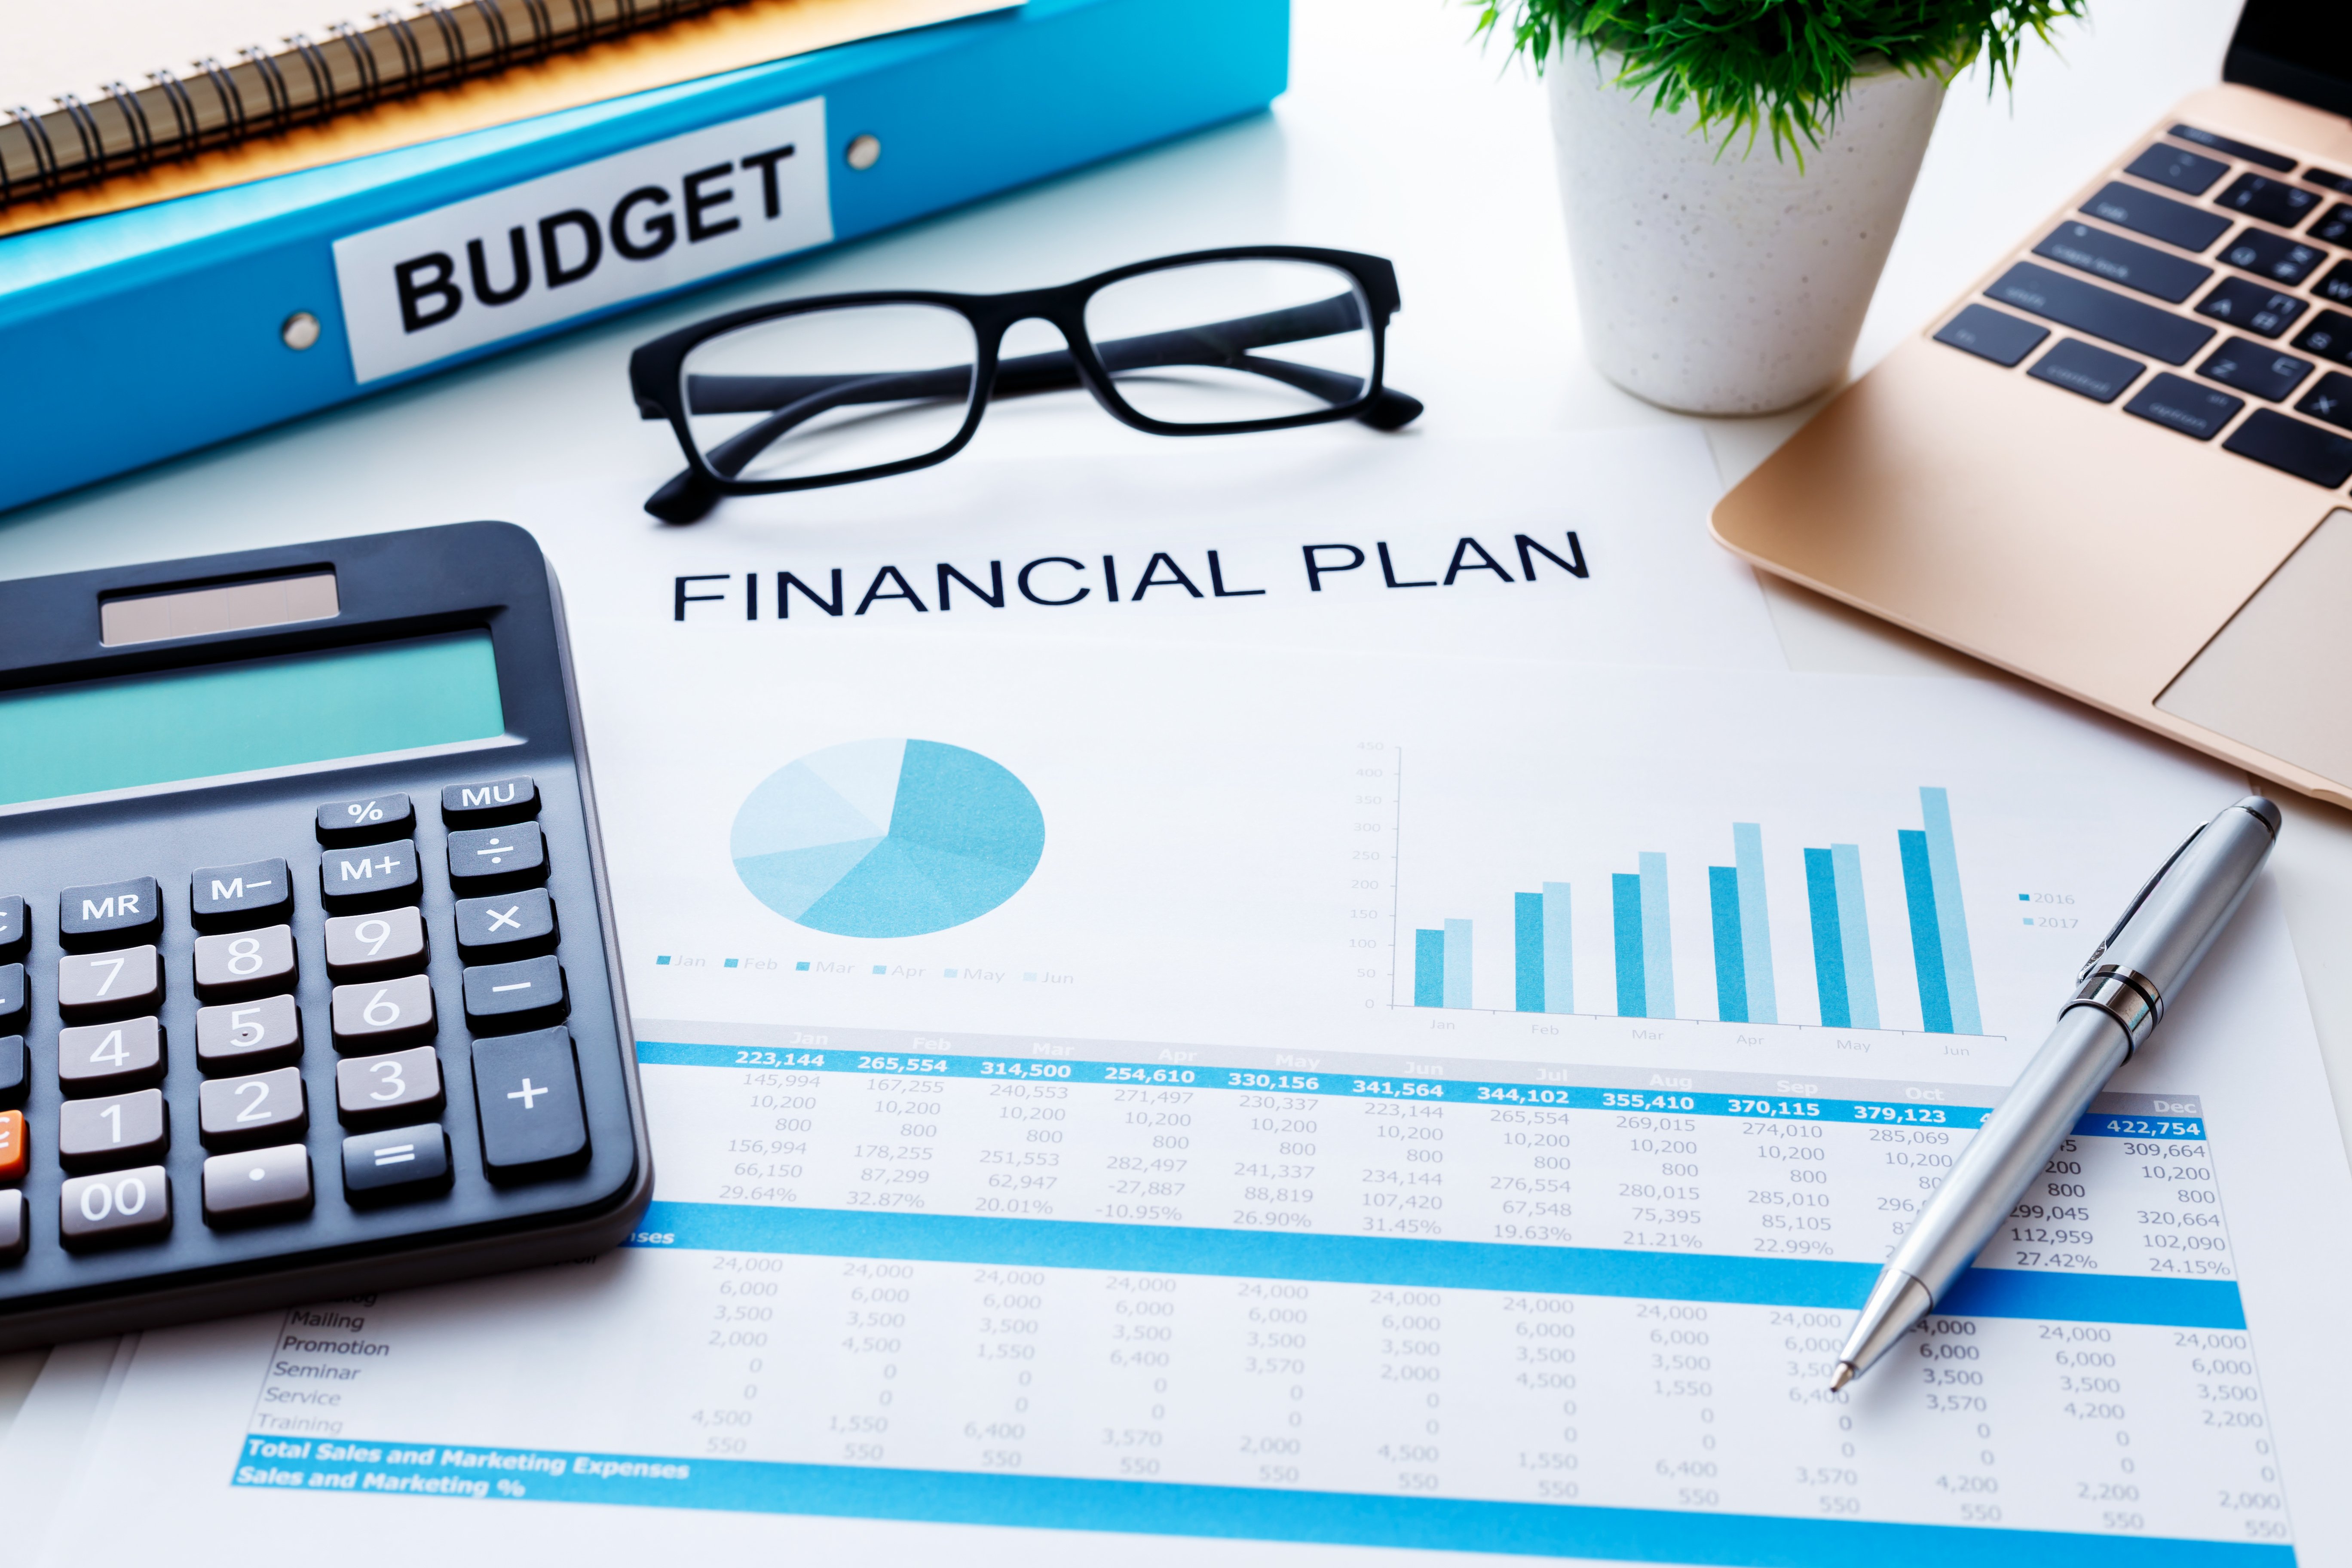 A financial report with graphs, charts, and tables representing the financial planning and budgeting process, illustrating the need for SOX compliance services